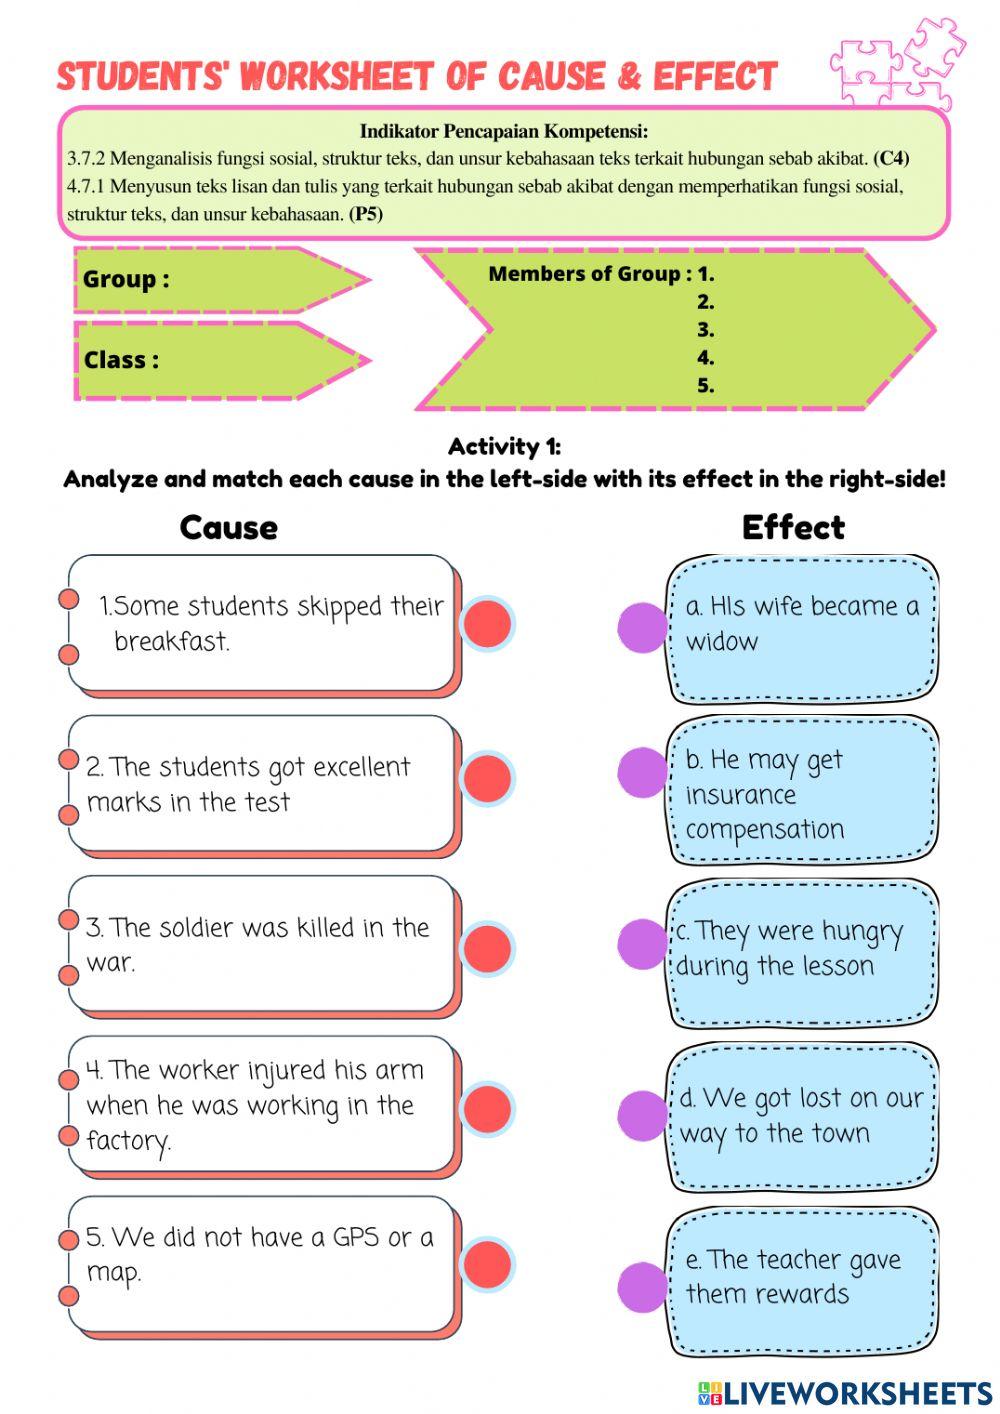 Students' worksheet of cause and effect